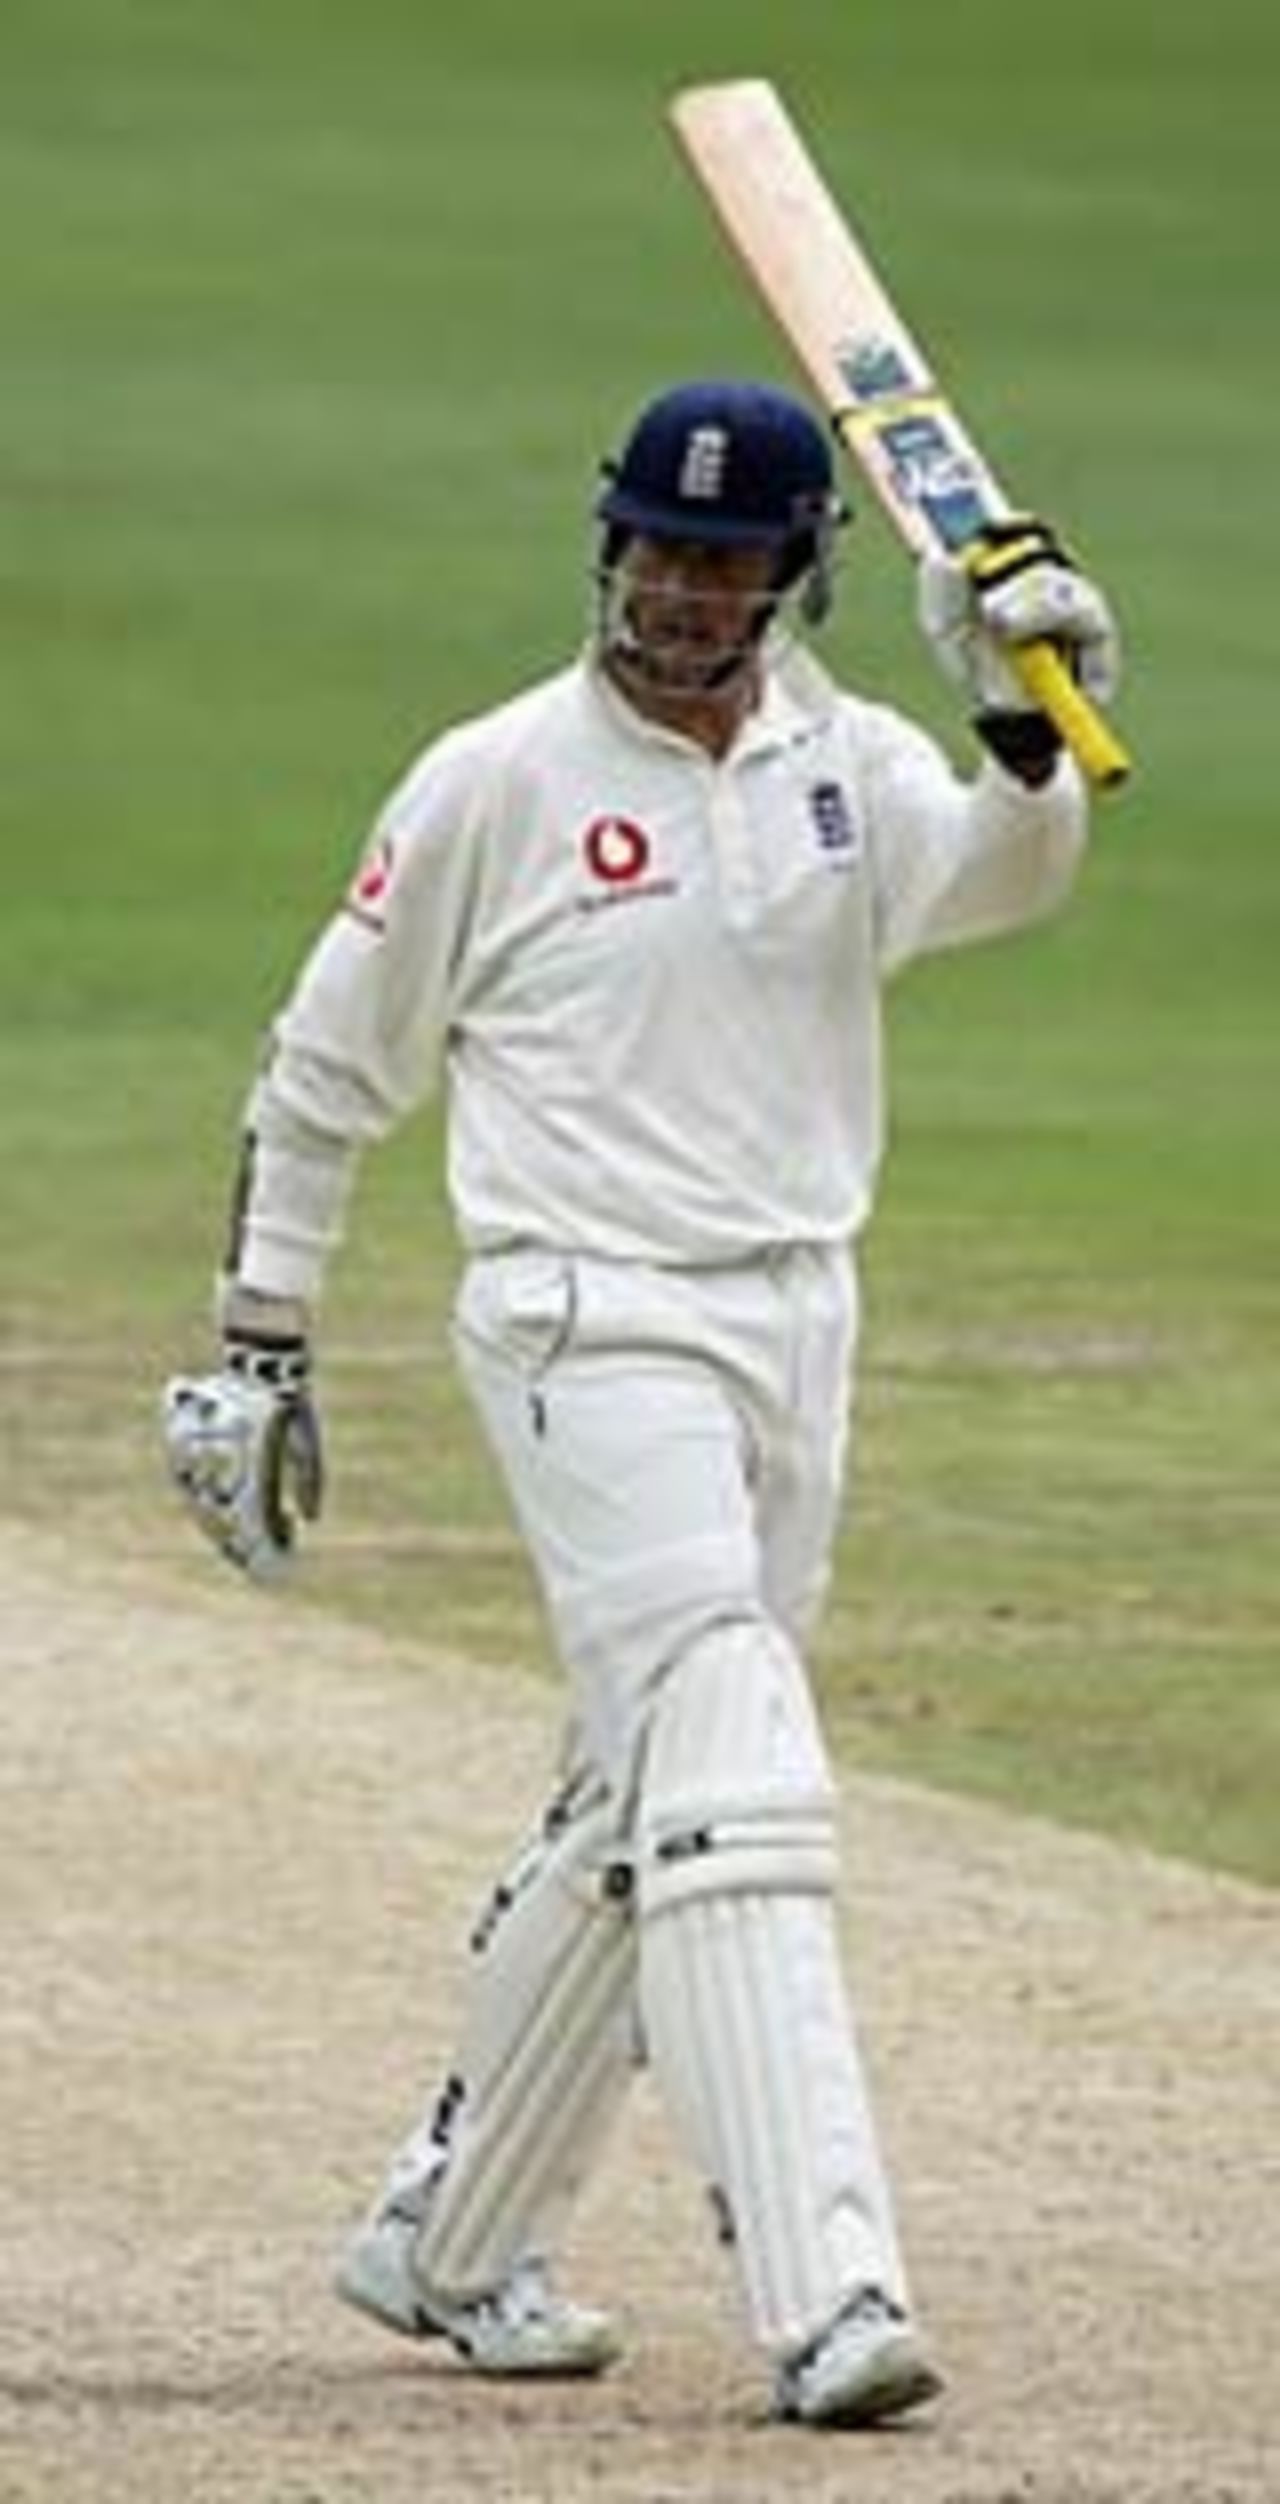 Marcus Trescothick brings up his 150, South Africa v England, 4th Test, The Wanderers, January 17, 2005